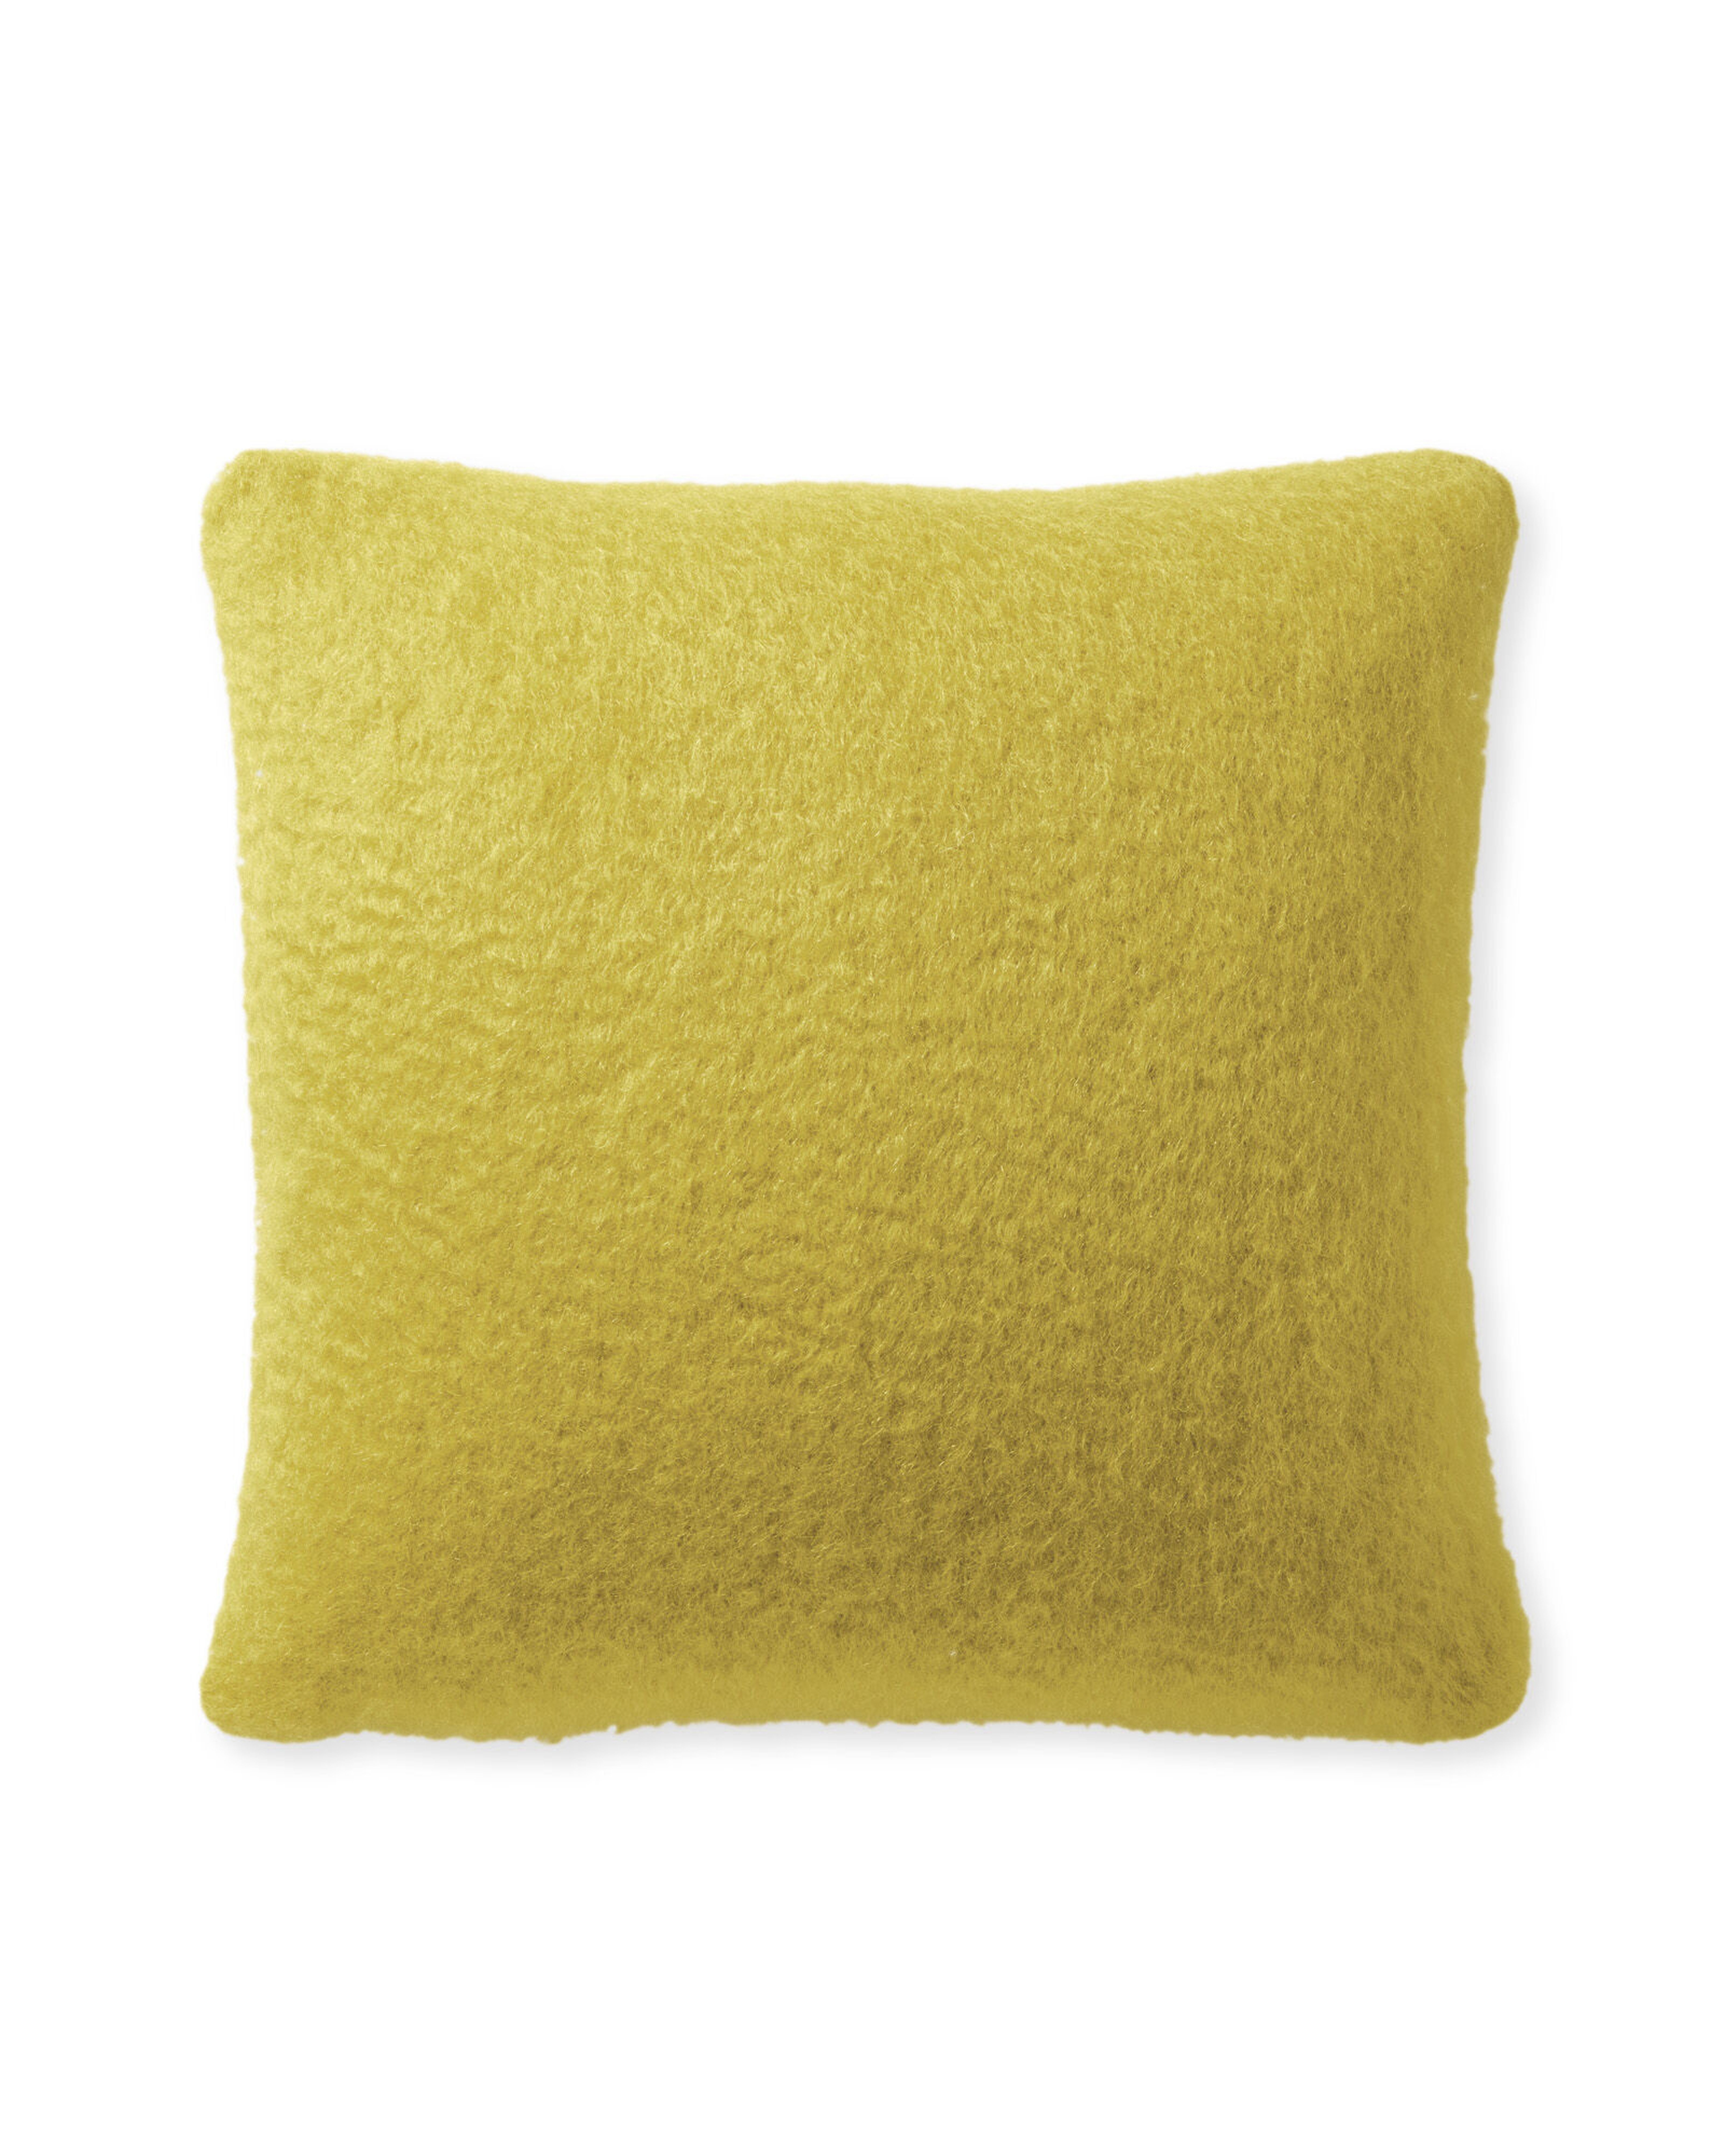 Albion Pillow Cover - Serena and Lily